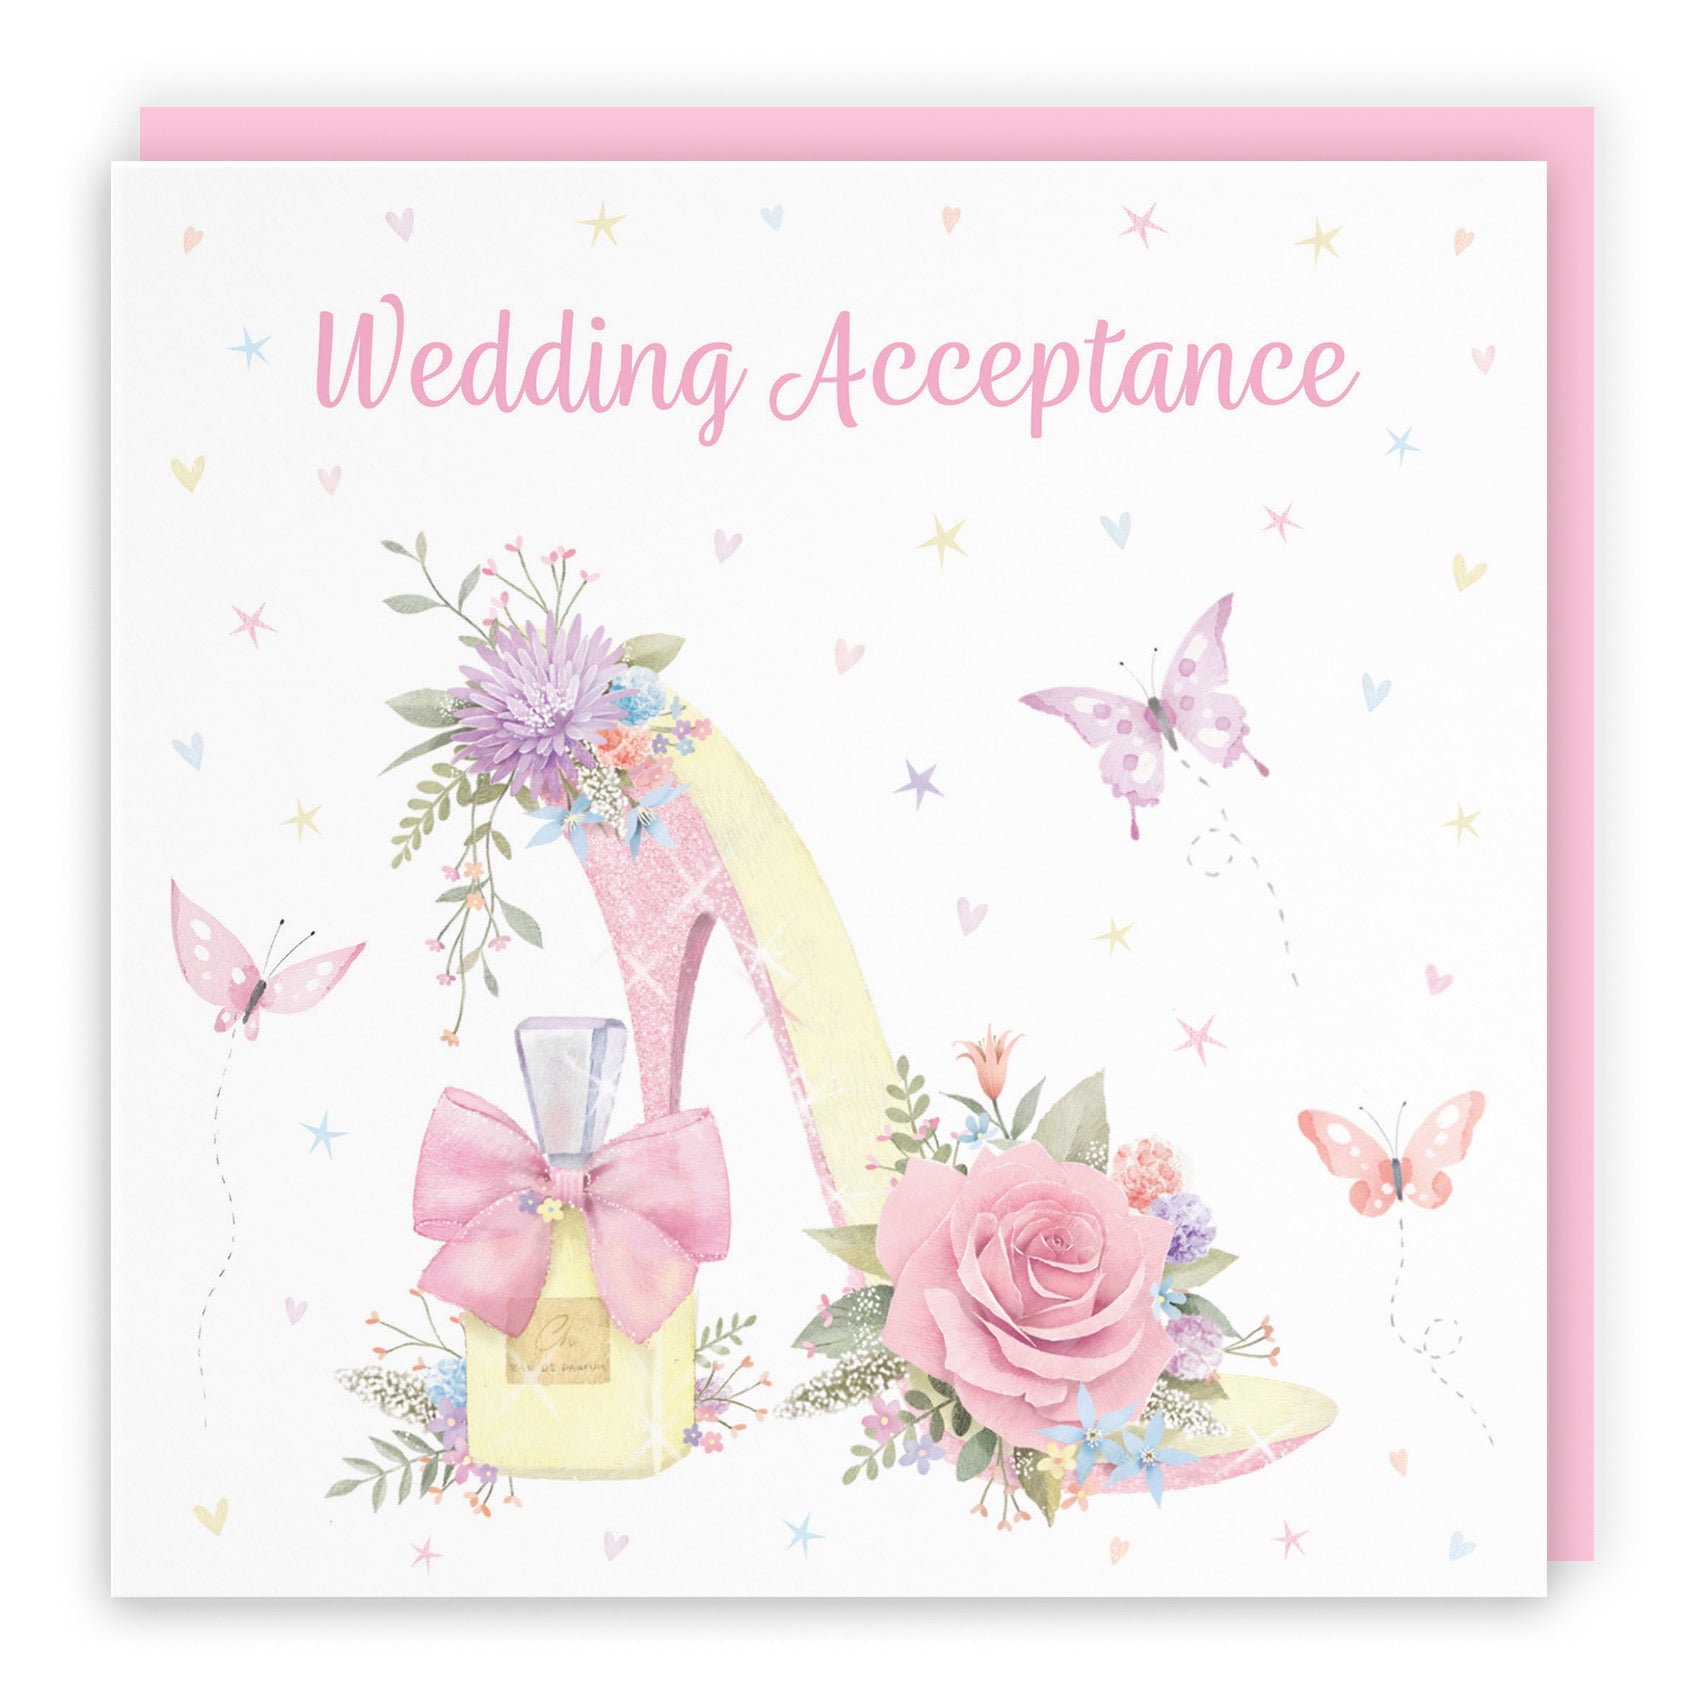 High Heel And Perfume Wedding Acceptance Card Milo's Gallery - Default Title (B0CX7FPXTK)